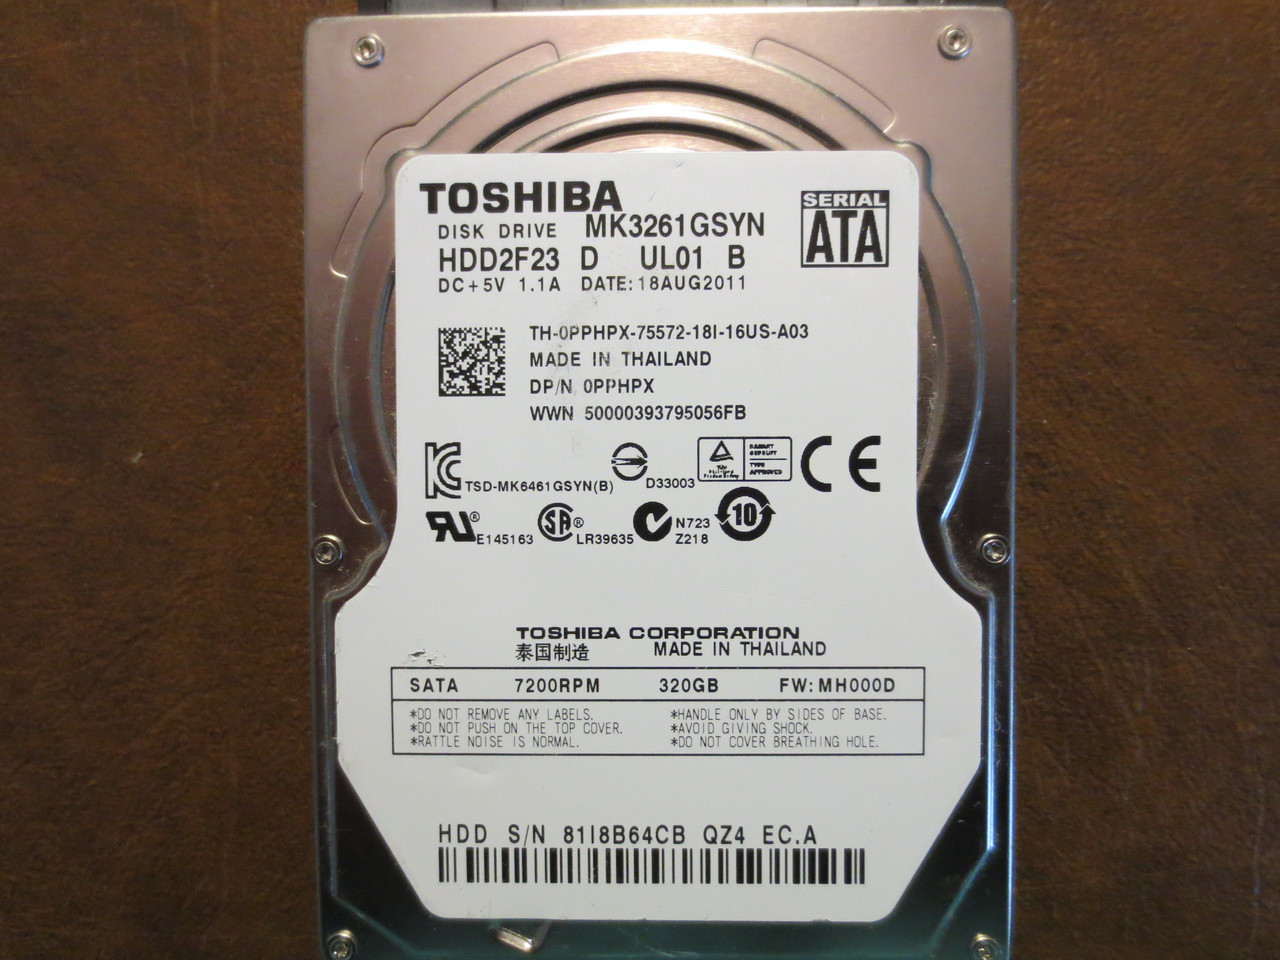 Toshiba MK3261GSYN HDD2F23 D UL01 B FW:MH000D 320gb Sata (Donor for Parts)  - Effective Electronics